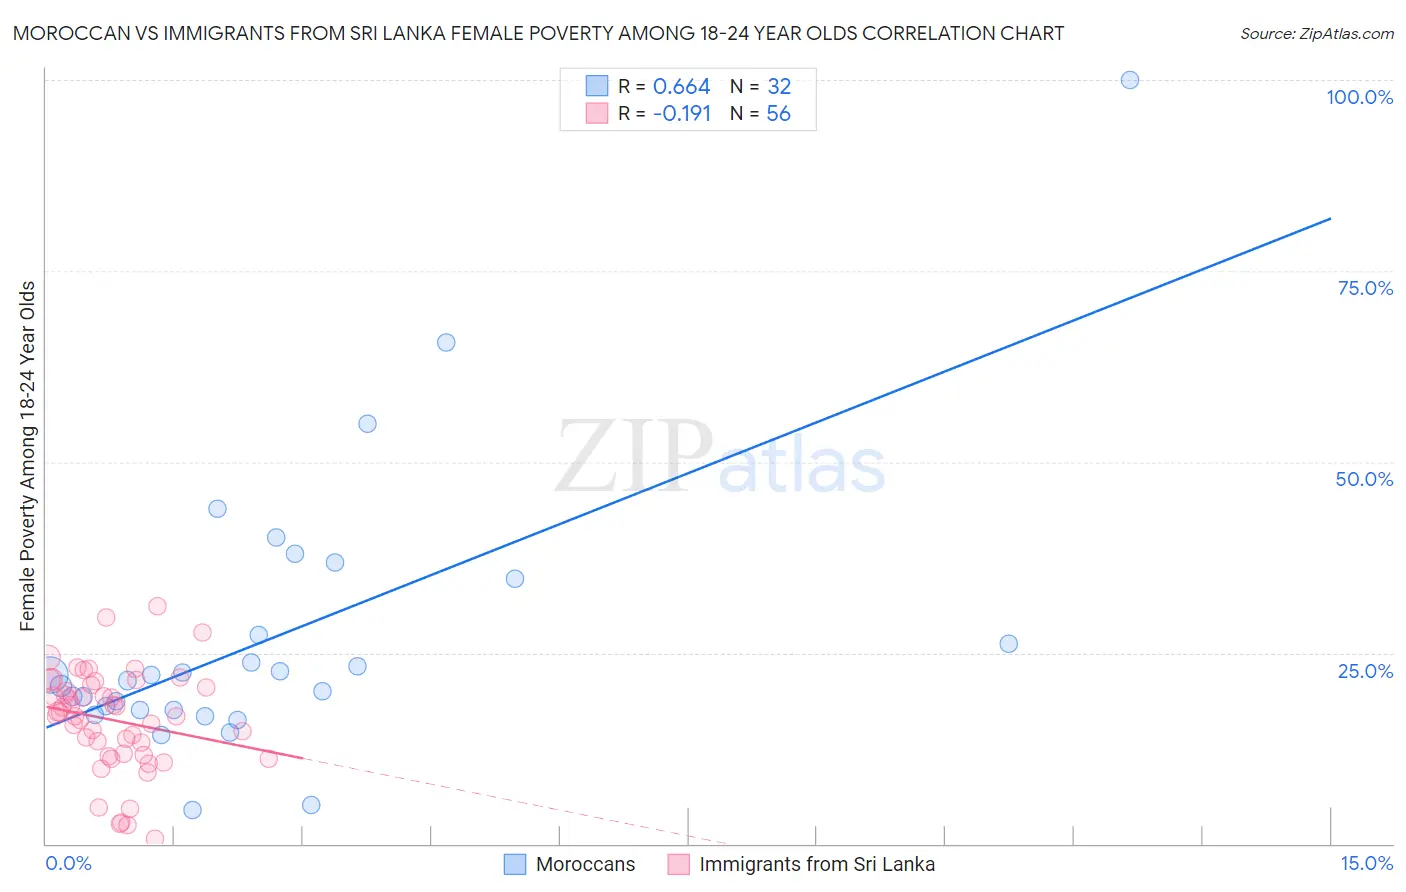 Moroccan vs Immigrants from Sri Lanka Female Poverty Among 18-24 Year Olds